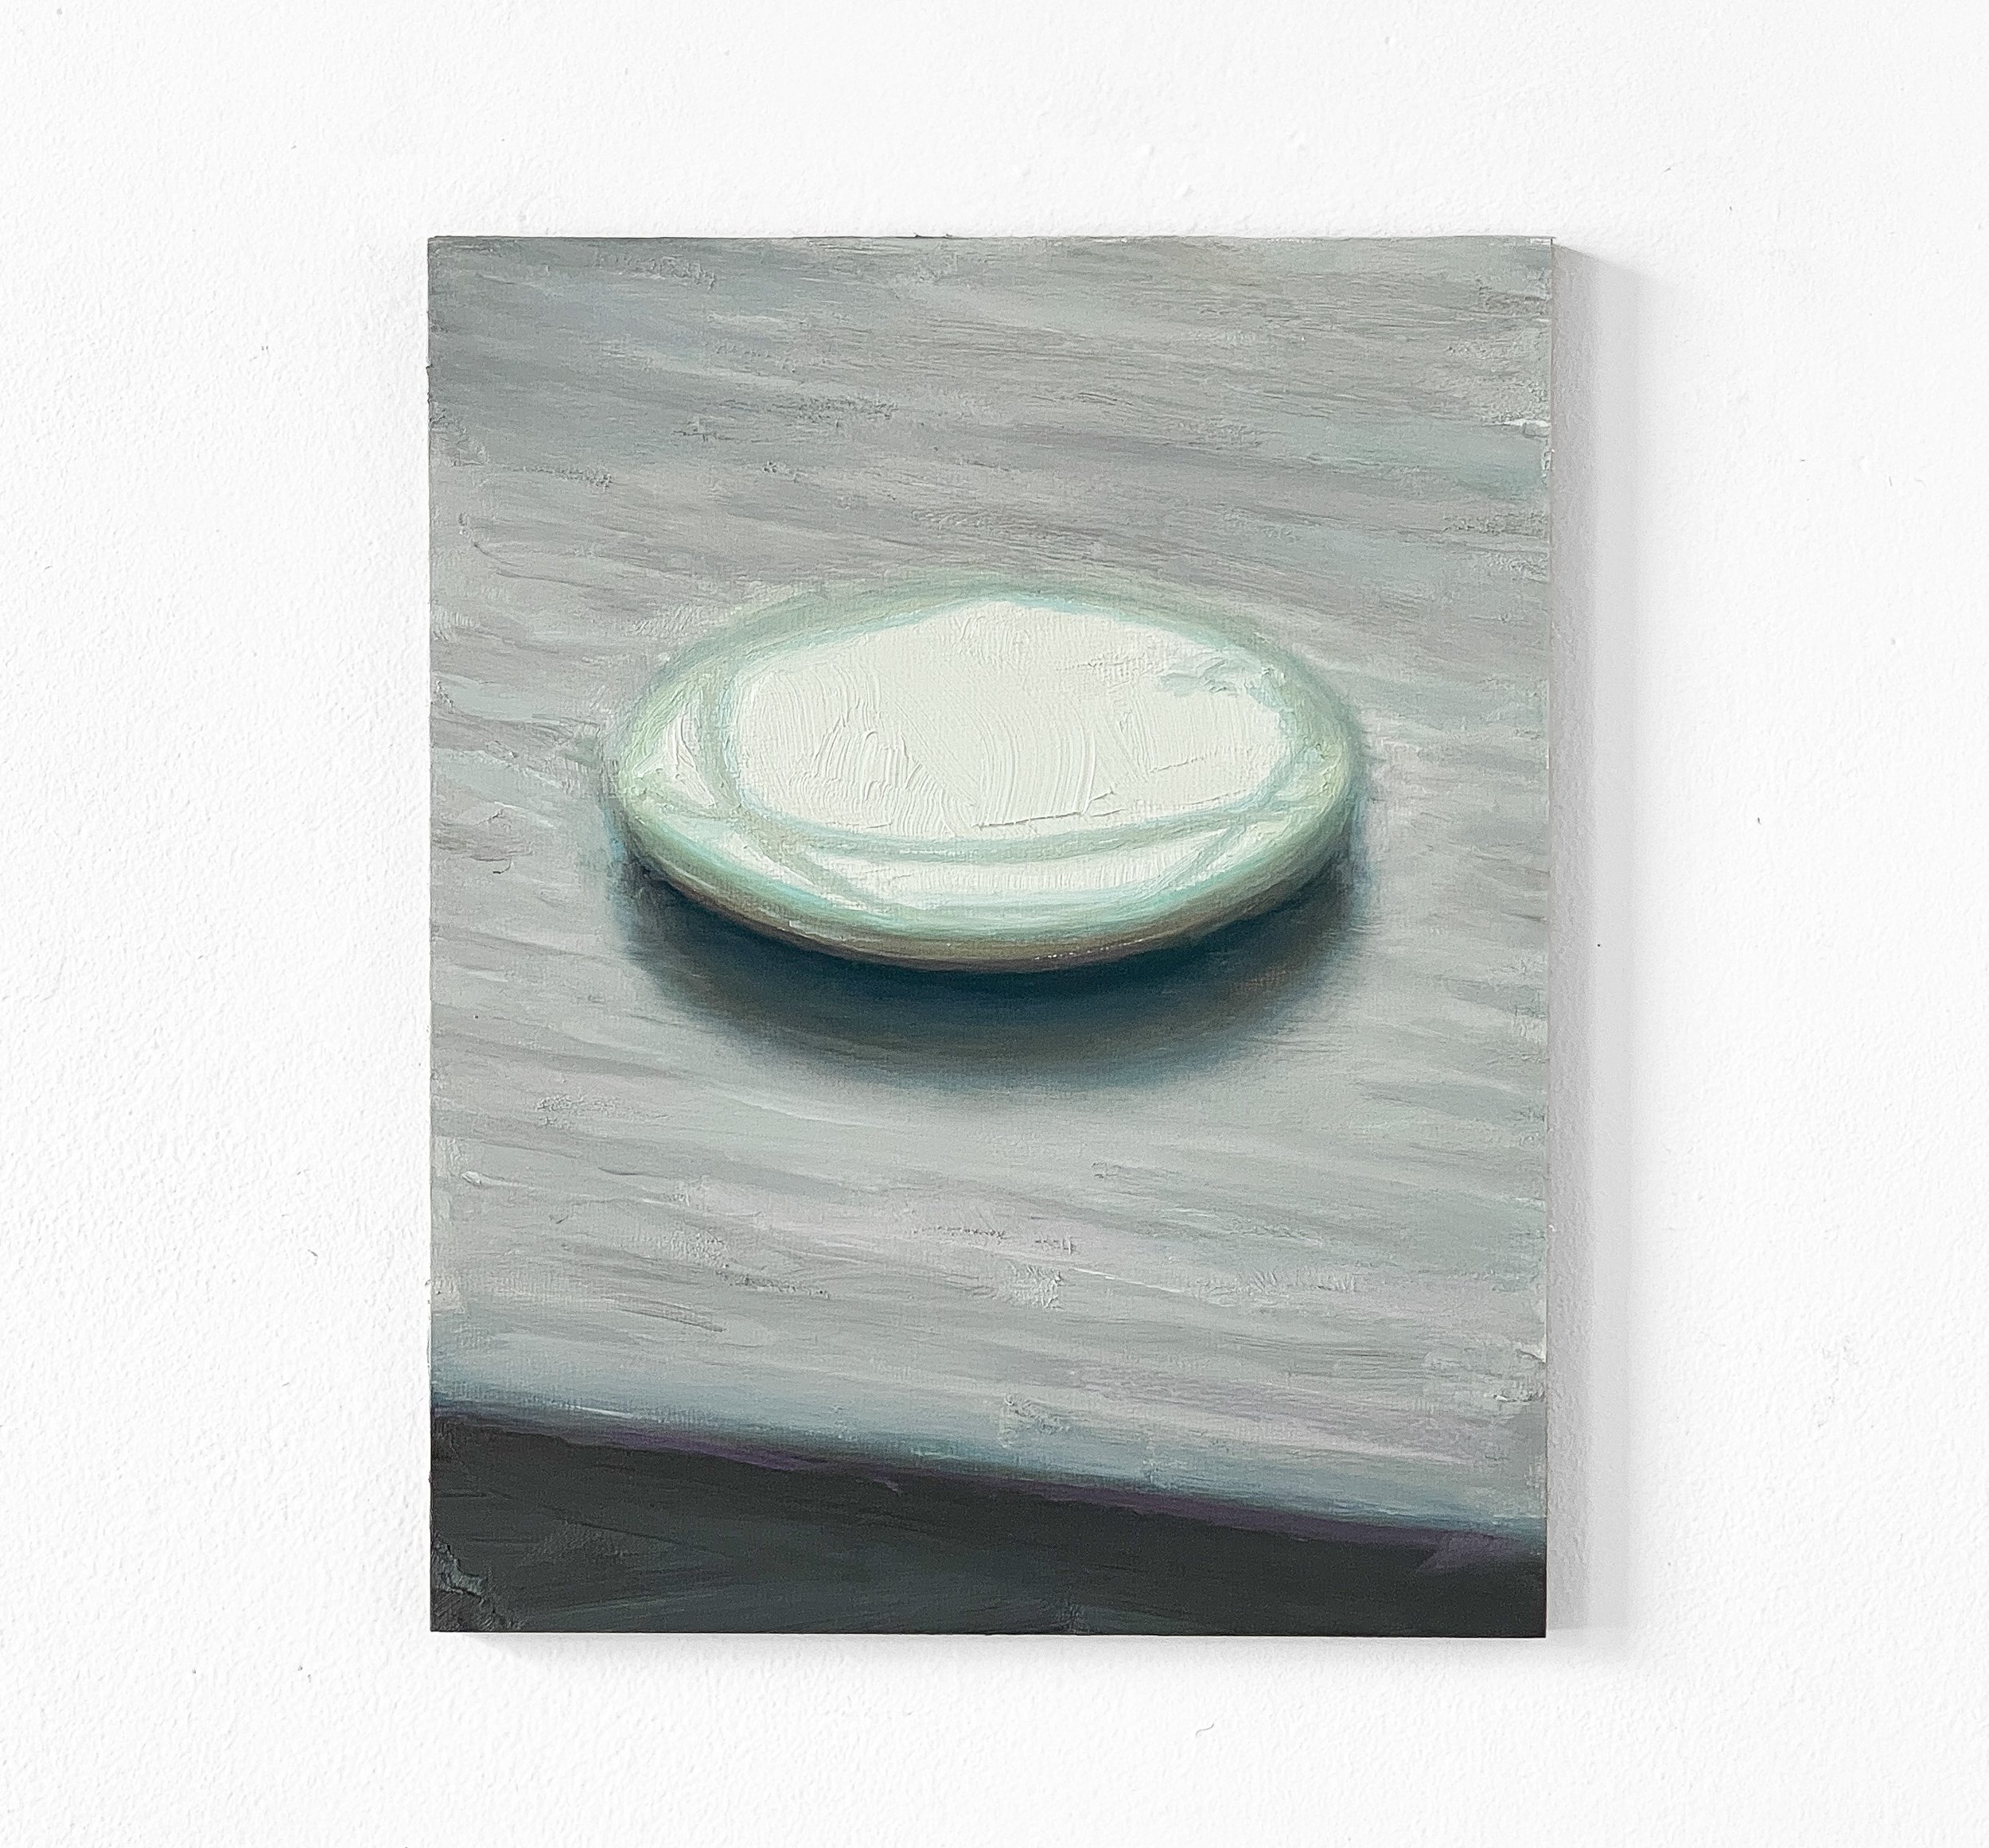  oblique button at the window  8 x 10 